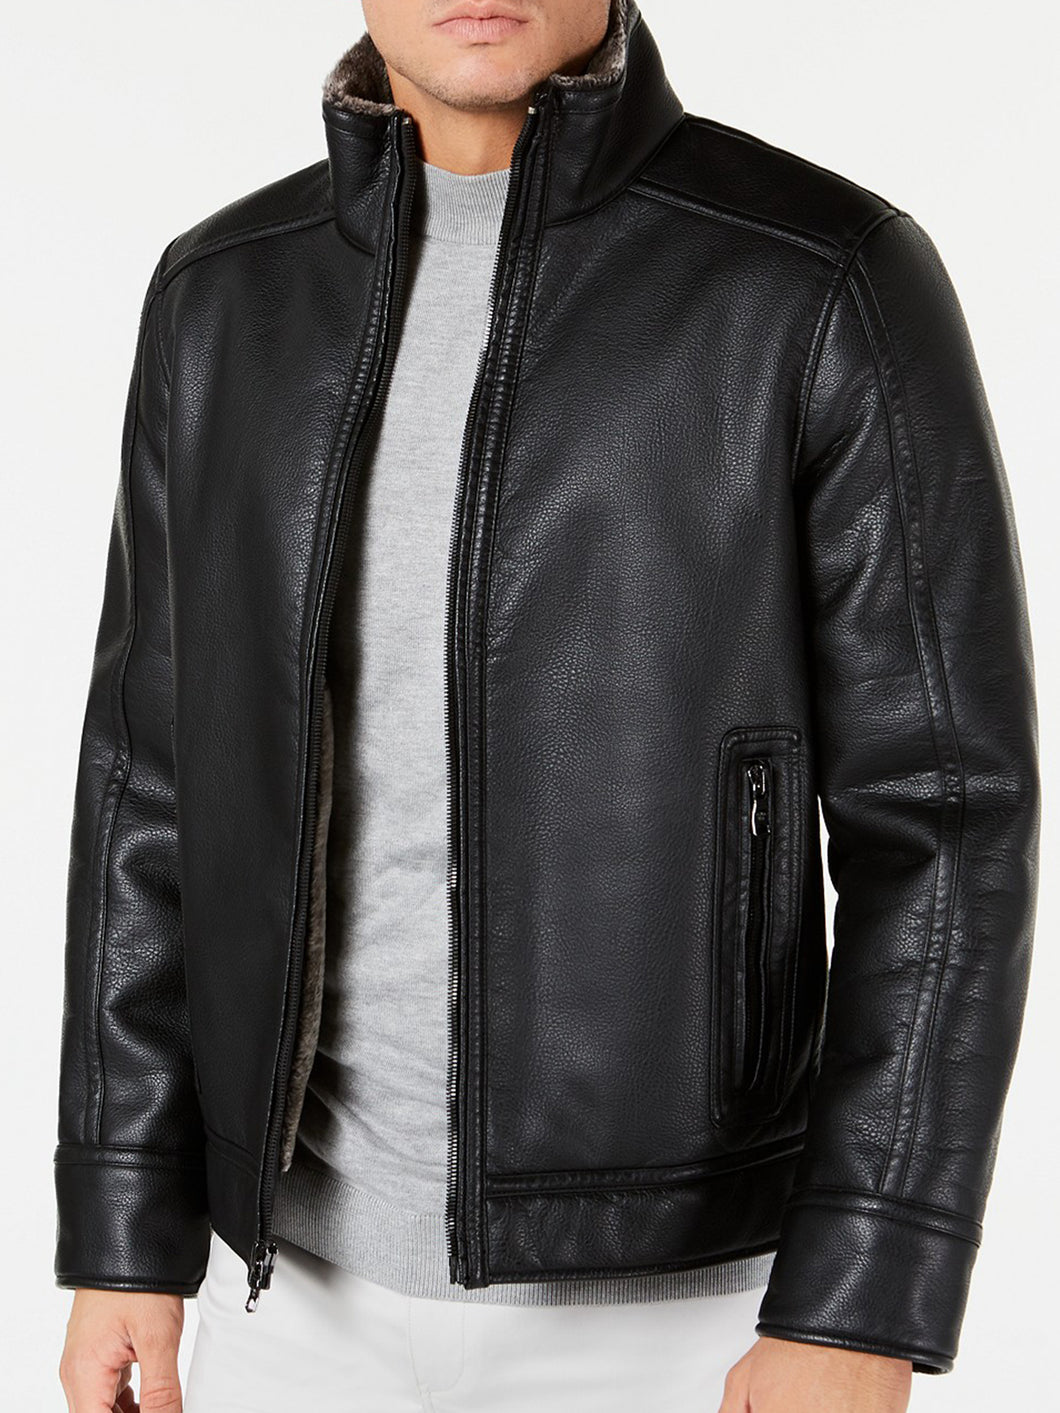 Men's Pebble Faux Leather Jacket With Faux Shearling Lining